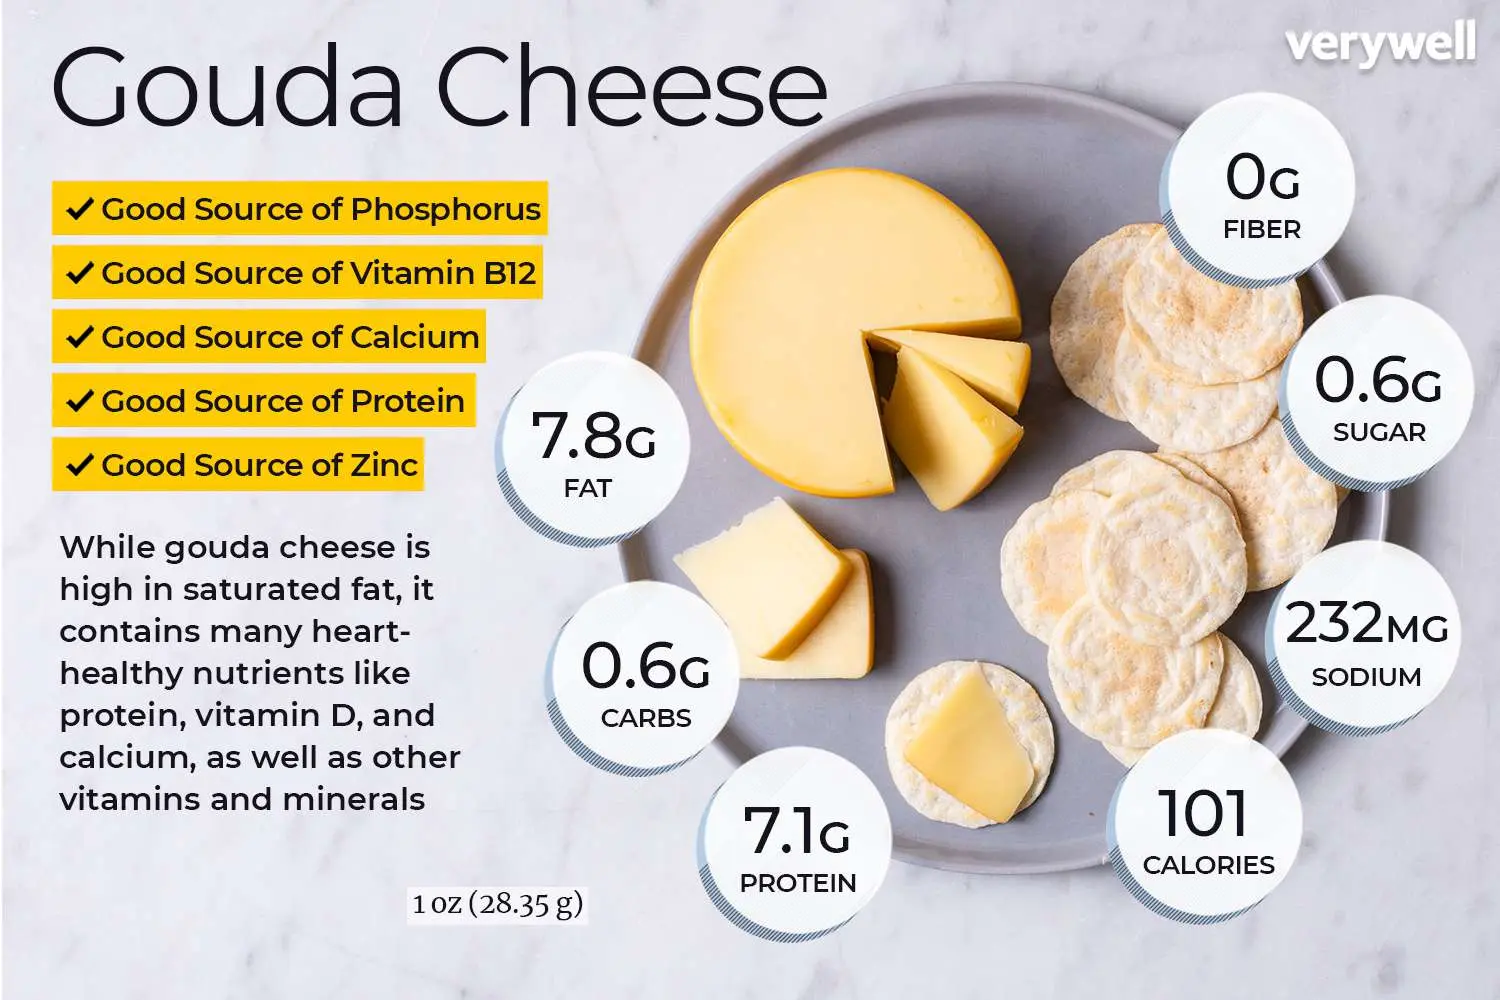 how many calories in smoked cheese - How many kcal are in 2 slices of cheese